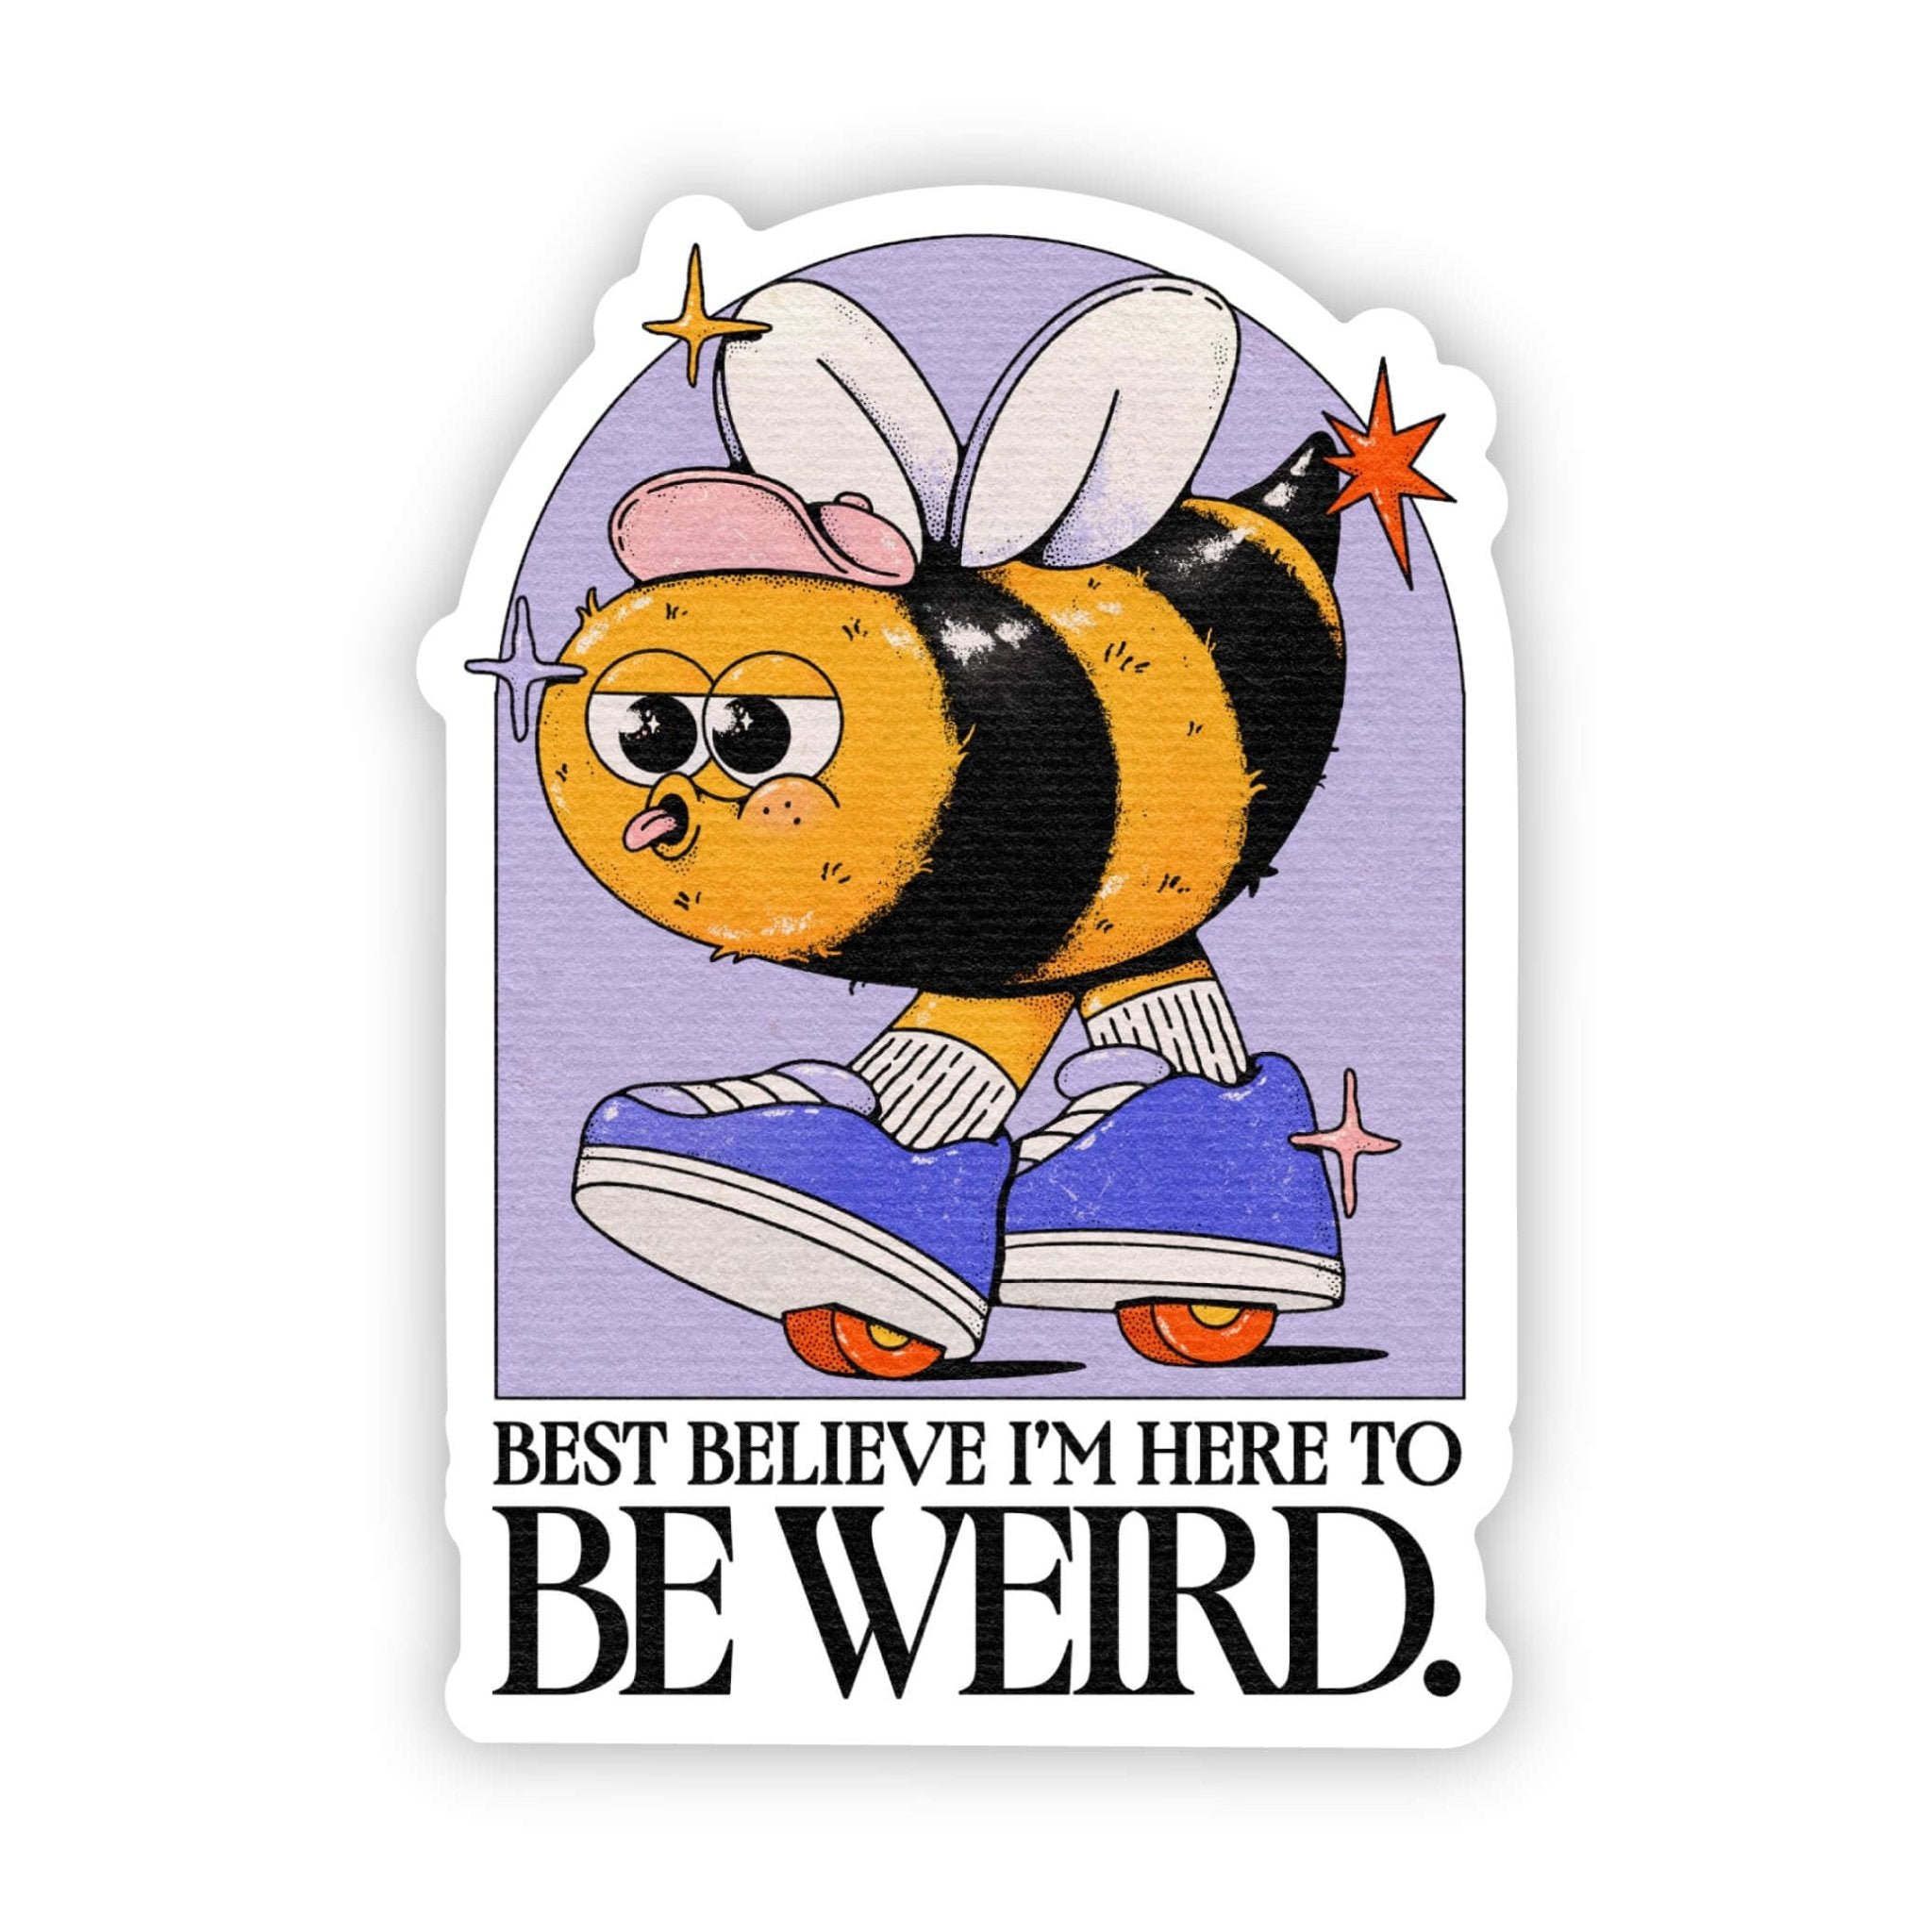 "Best Believe I'm Here To Be Weird" Bee sticker - Sacred Crystals Stickers